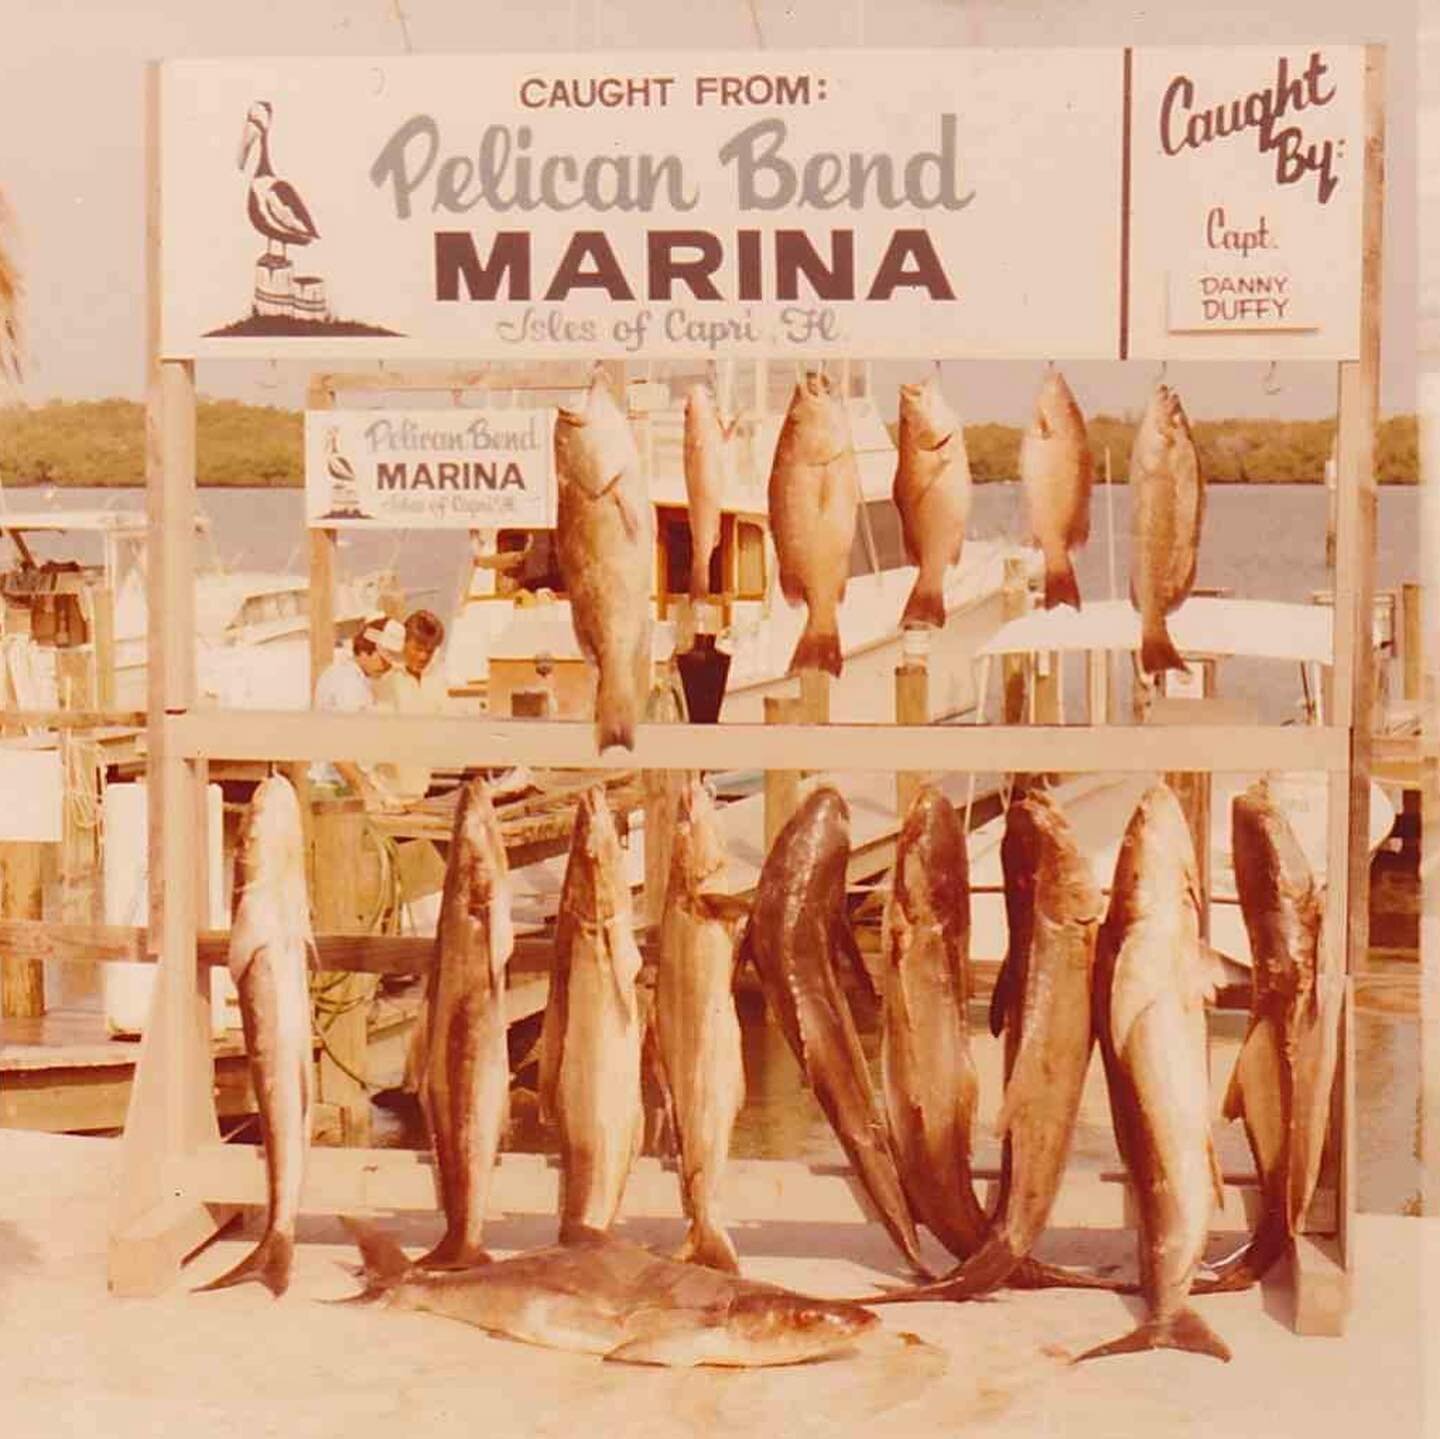 Throwback Thursday! 

1984 ➡️ 2021

Even after all of these years, captains are still bringing in amazing catches back to the dock!

#pelicanbend #islesofcapri #marcoisland #naplesfl